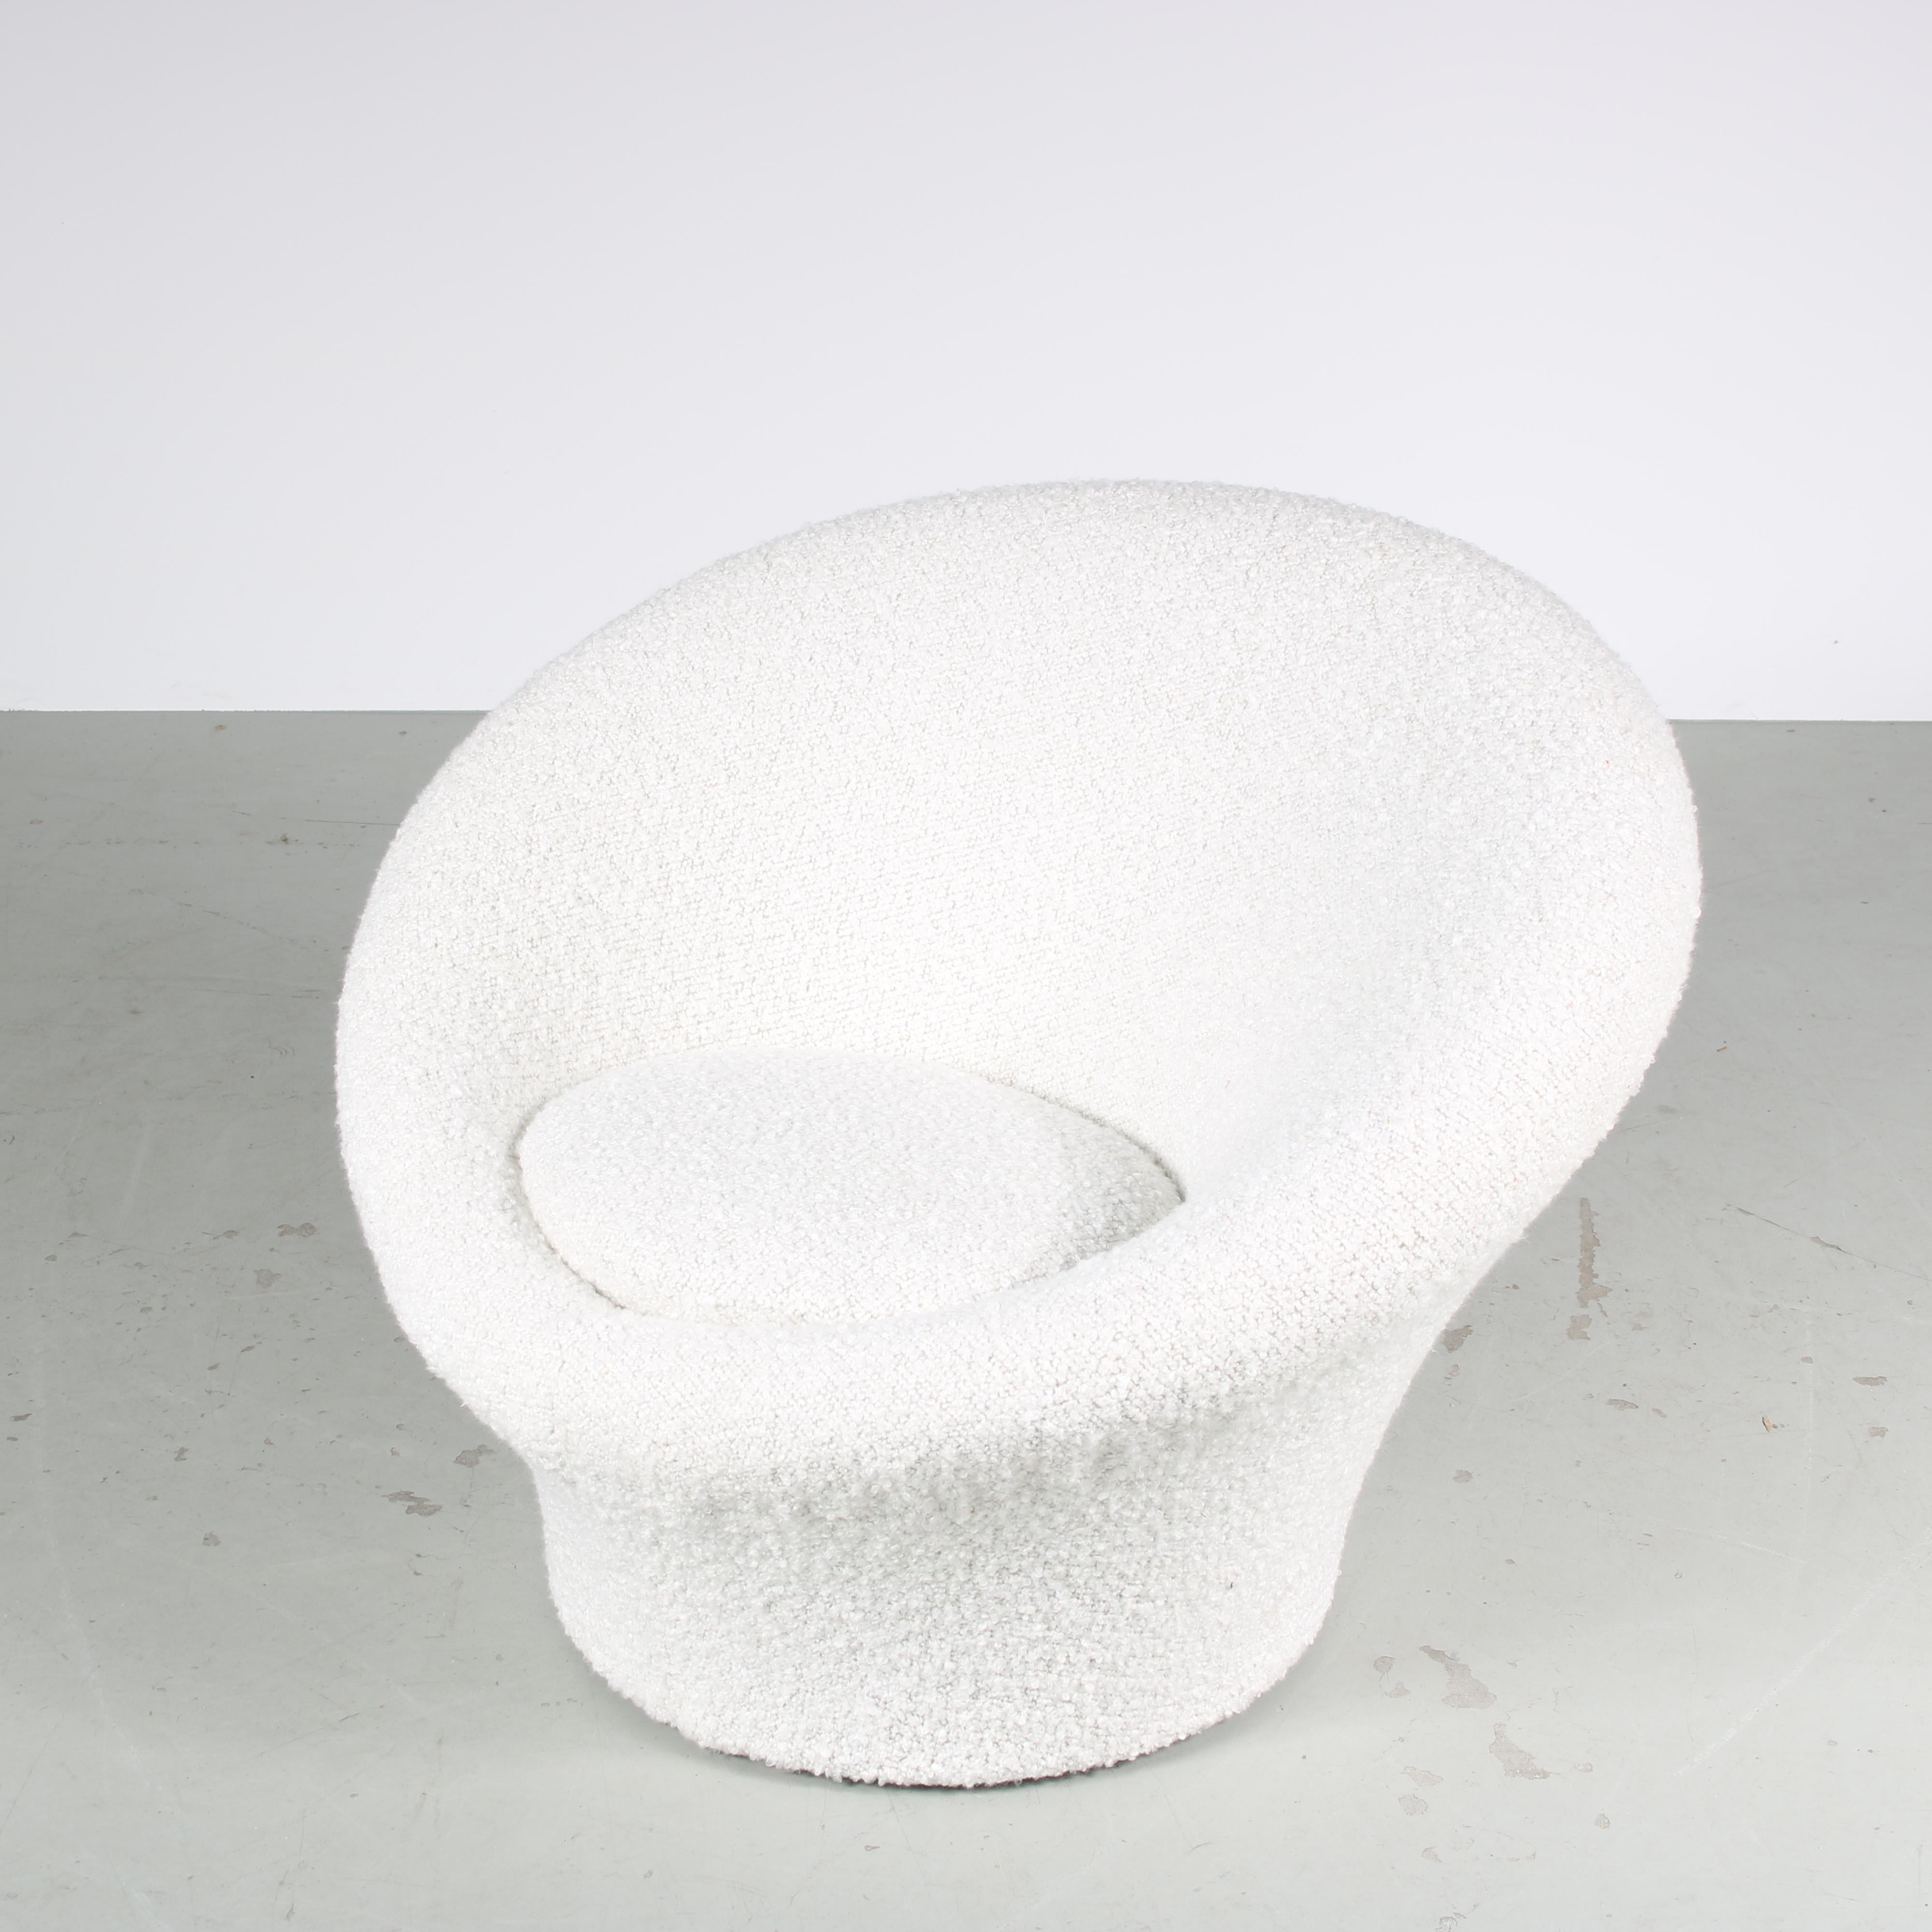 Pierre Paulin “Mushroom” Chair with Stool for Artifort, Netherlands 1960 For Sale 1